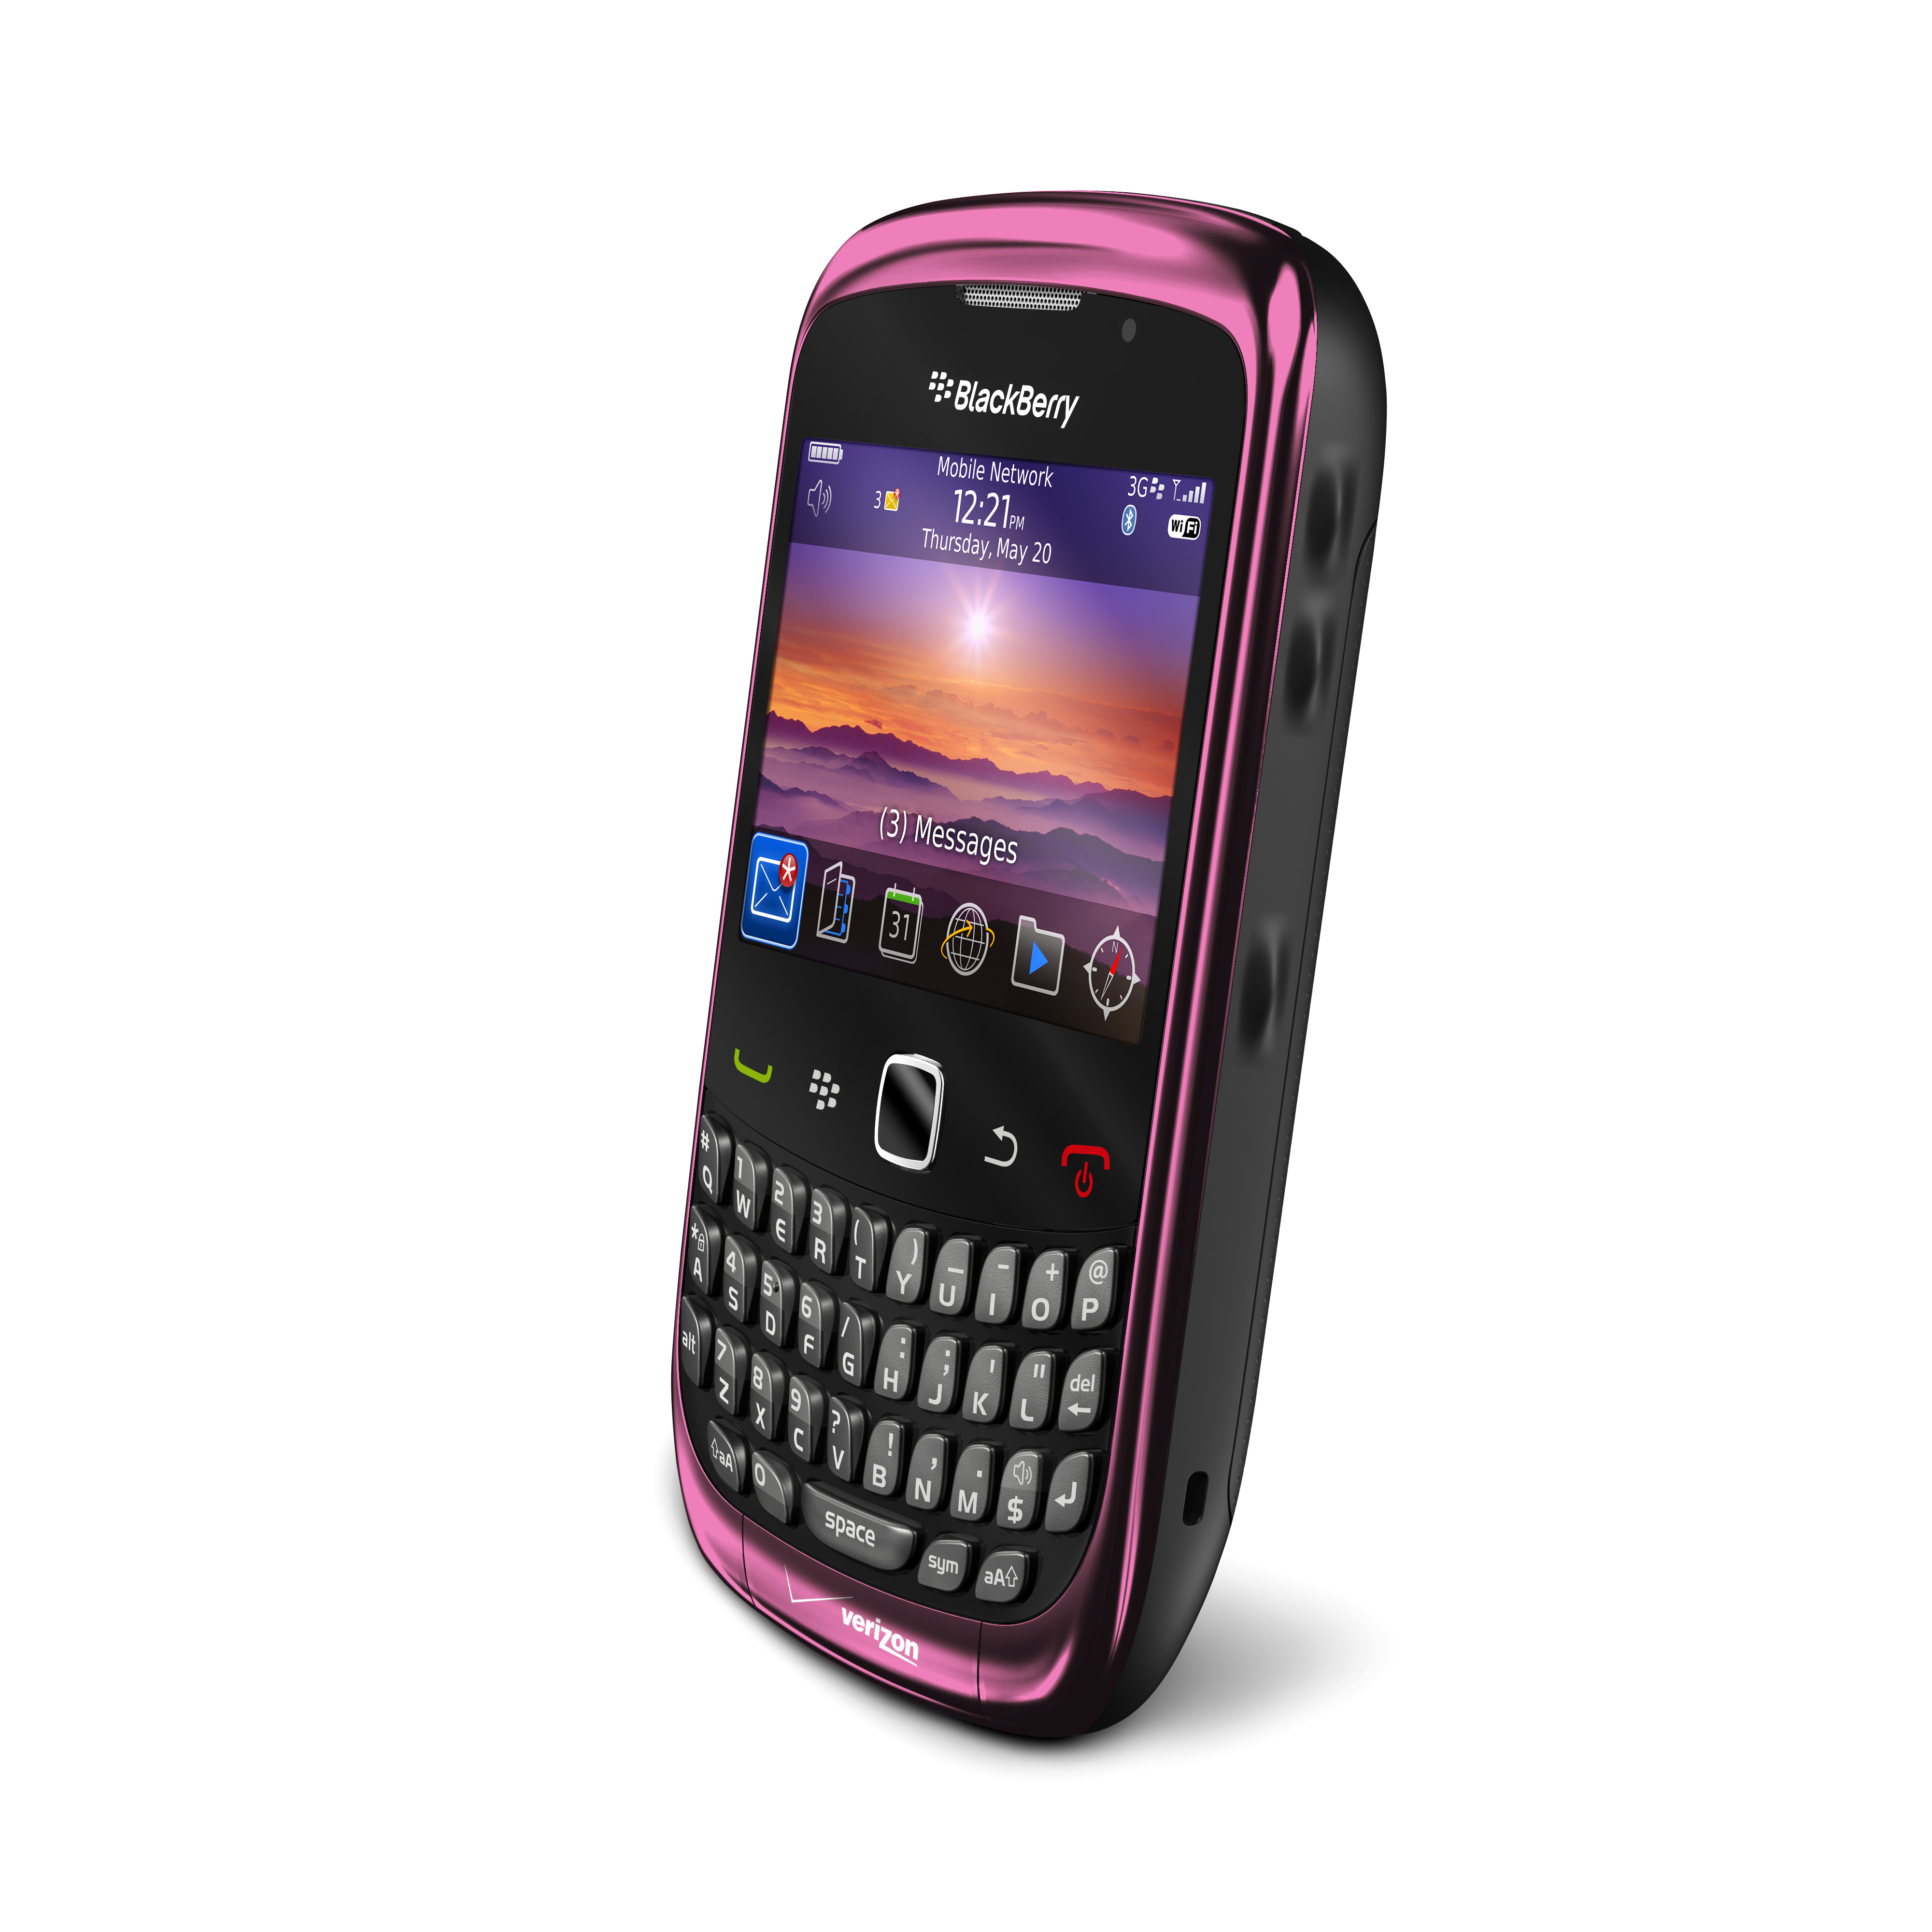 Blackberry Curve 9300 Red And Black